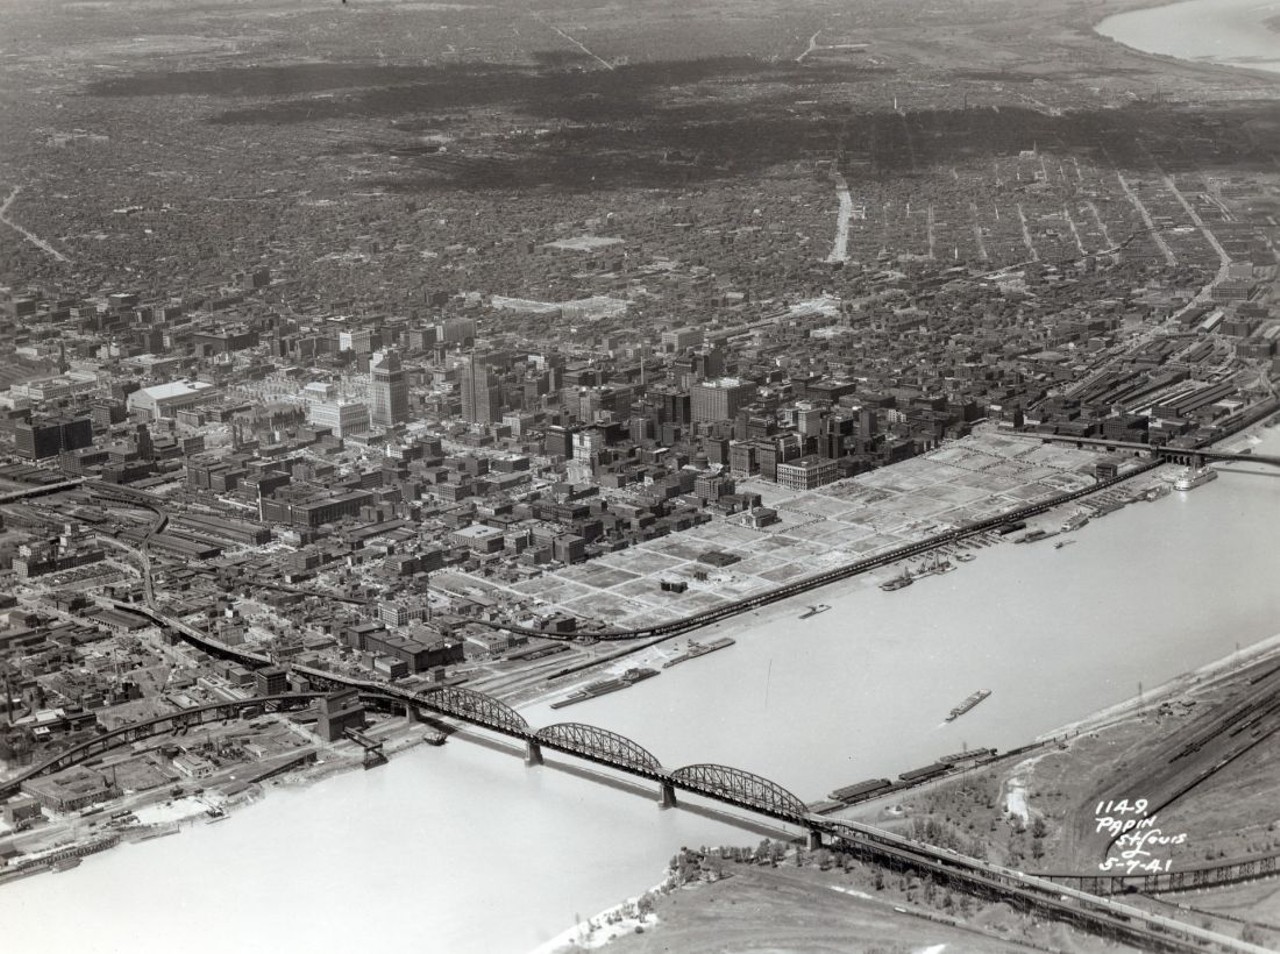 AFTER CLEARING THE RIVERFRONT, 1941
"Nearly 40 blocks totaling more than 50 million square feet of business space were destroyed for the Jefferson National Expansion Memorial. These demolished streets and structures made up most of St. Louis's original village from 1764 and were among the city's most historically significant." &#151; Andrew Wanko, 'Great River City'
Aerial view of St. Louis riverfront, showing progress on demolition of the Jefferson National Expansion Memorial site. 7, May 1941. Photograph by P.R. Papin Aerial Surveys, 1941. Missouri Historical Society Collections